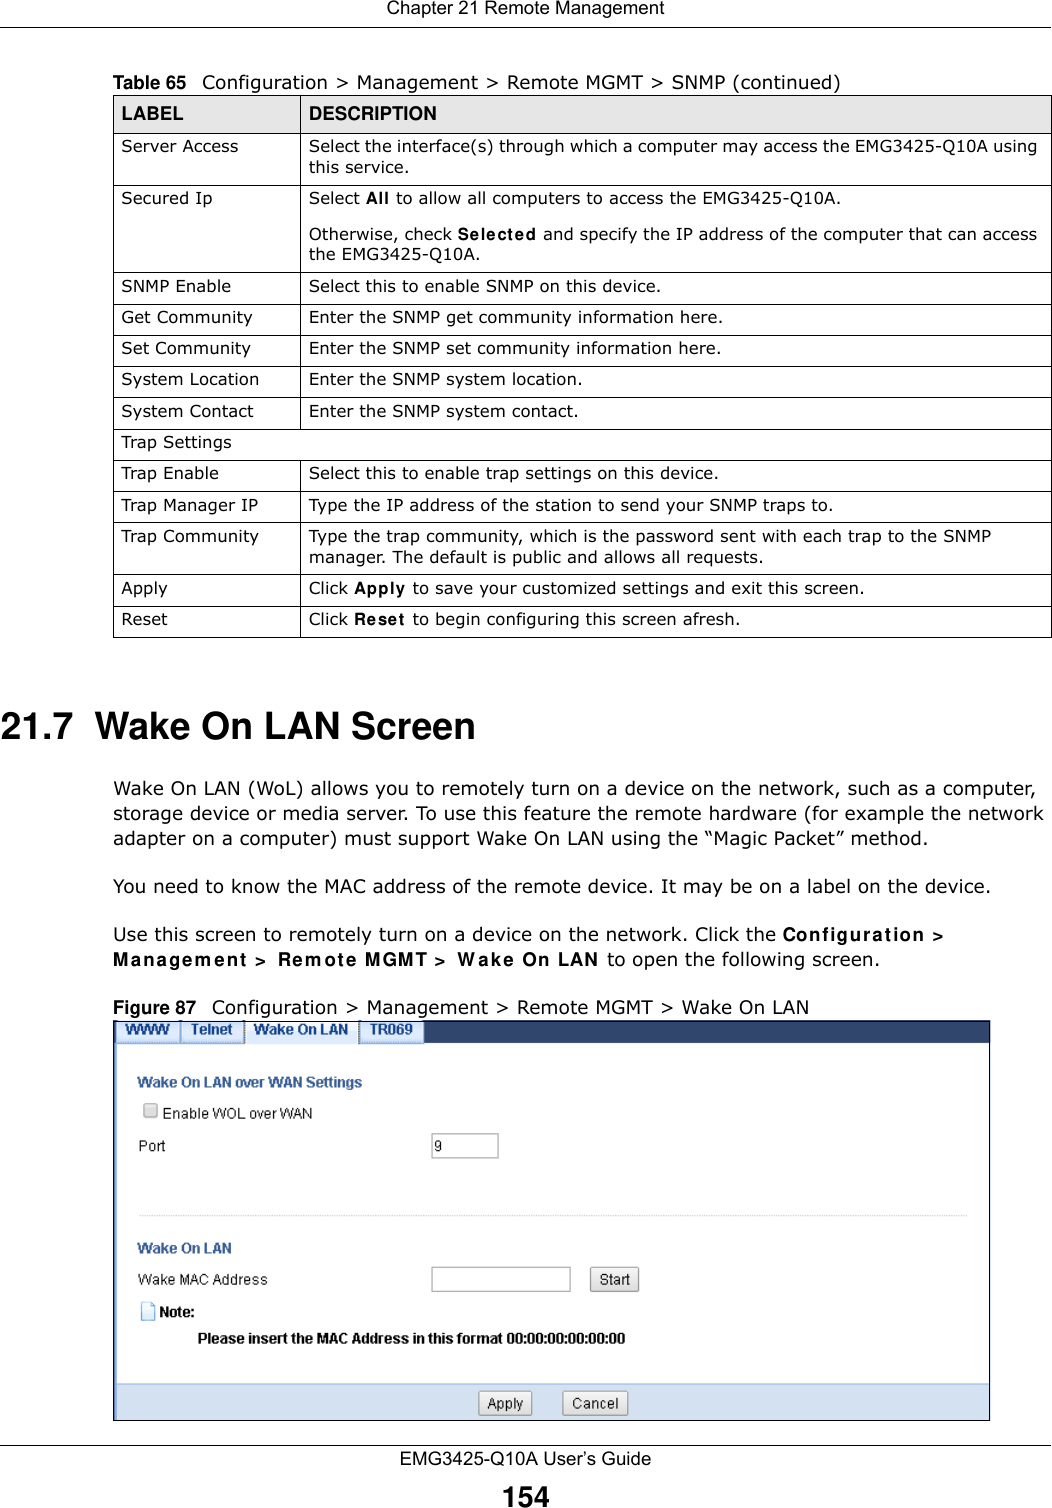 Chapter 21 Remote ManagementEMG3425-Q10A User’s Guide15421.7  Wake On LAN ScreenWake On LAN (WoL) allows you to remotely turn on a device on the network, such as a computer, storage device or media server. To use this feature the remote hardware (for example the network adapter on a computer) must support Wake On LAN using the “Magic Packet” method. You need to know the MAC address of the remote device. It may be on a label on the device.Use this screen to remotely turn on a device on the network. Click the Con figur at ion &gt; Ma n a gem e n t  &gt;  Rem ote M GMT &gt;  W a ke On LAN  to open the following screen.Figure 87   Configuration &gt; Management &gt; Remote MGMT &gt; Wake On LAN Server Access Select the interface(s) through which a computer may access the EMG3425-Q10A using this service.Secured Ip Select All to allow all computers to access the EMG3425-Q10A.Otherwise, check Sele ct ed and specify the IP address of the computer that can access the EMG3425-Q10A.SNMP Enable  Select this to enable SNMP on this device.Get Community Enter the SNMP get community information here.Set Community Enter the SNMP set community information here.System Location Enter the SNMP system location.System Contact Enter the SNMP system contact.Trap SettingsTrap Enable Select this to enable trap settings on this device.Trap Manager IP Type the IP address of the station to send your SNMP traps to.Trap Community Type the trap community, which is the password sent with each trap to the SNMP manager. The default is public and allows all requests.Apply Click Apply  to save your customized settings and exit this screen. Reset Click Re se t  to begin configuring this screen afresh.Table 65   Configuration &gt; Management &gt; Remote MGMT &gt; SNMP (continued)LABEL DESCRIPTION